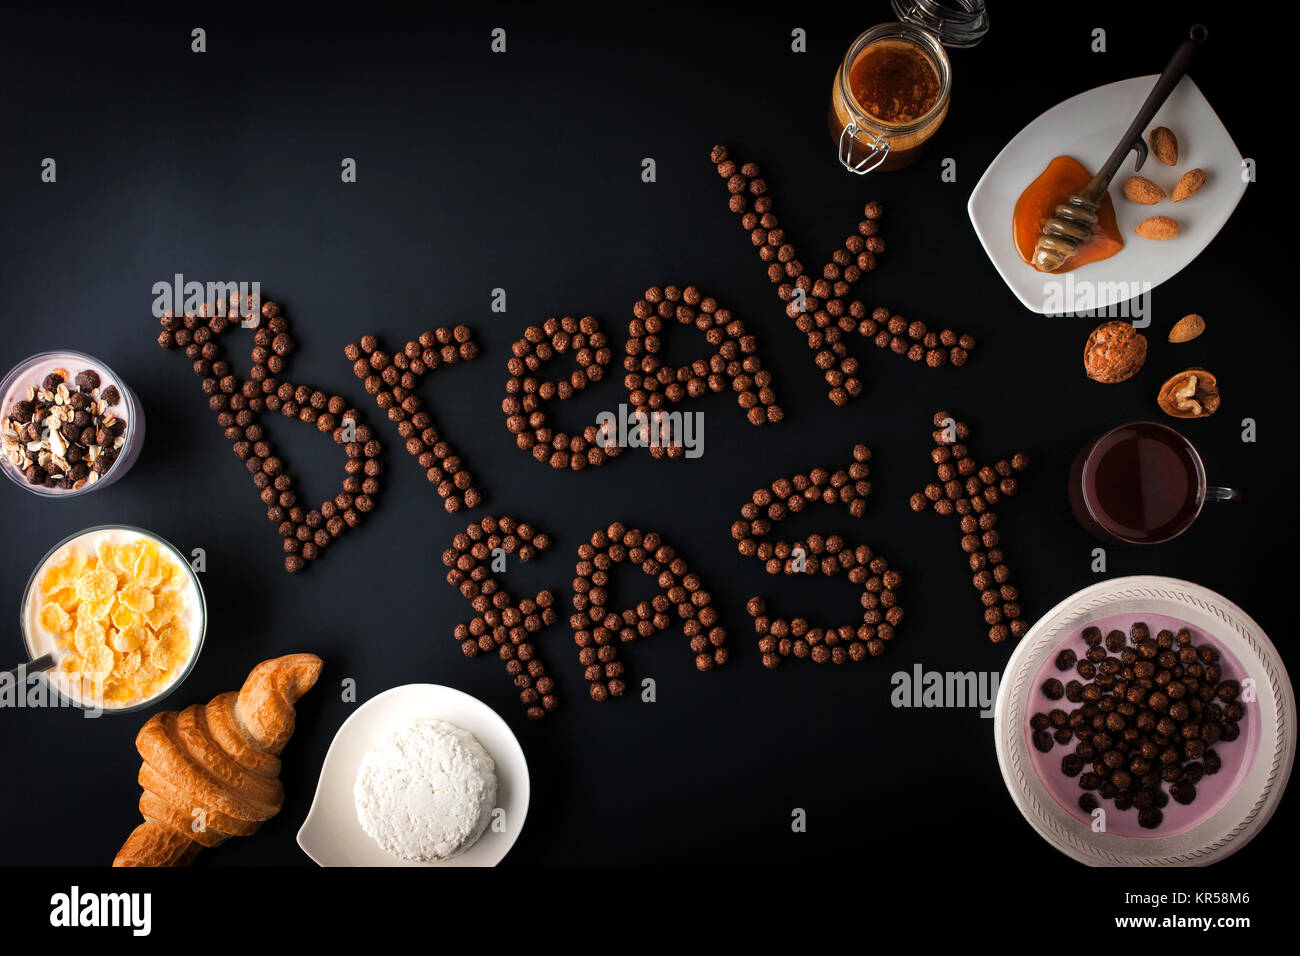 Breakfast word made by chocolate crispy ball with different breakfast attributes Stock Photo